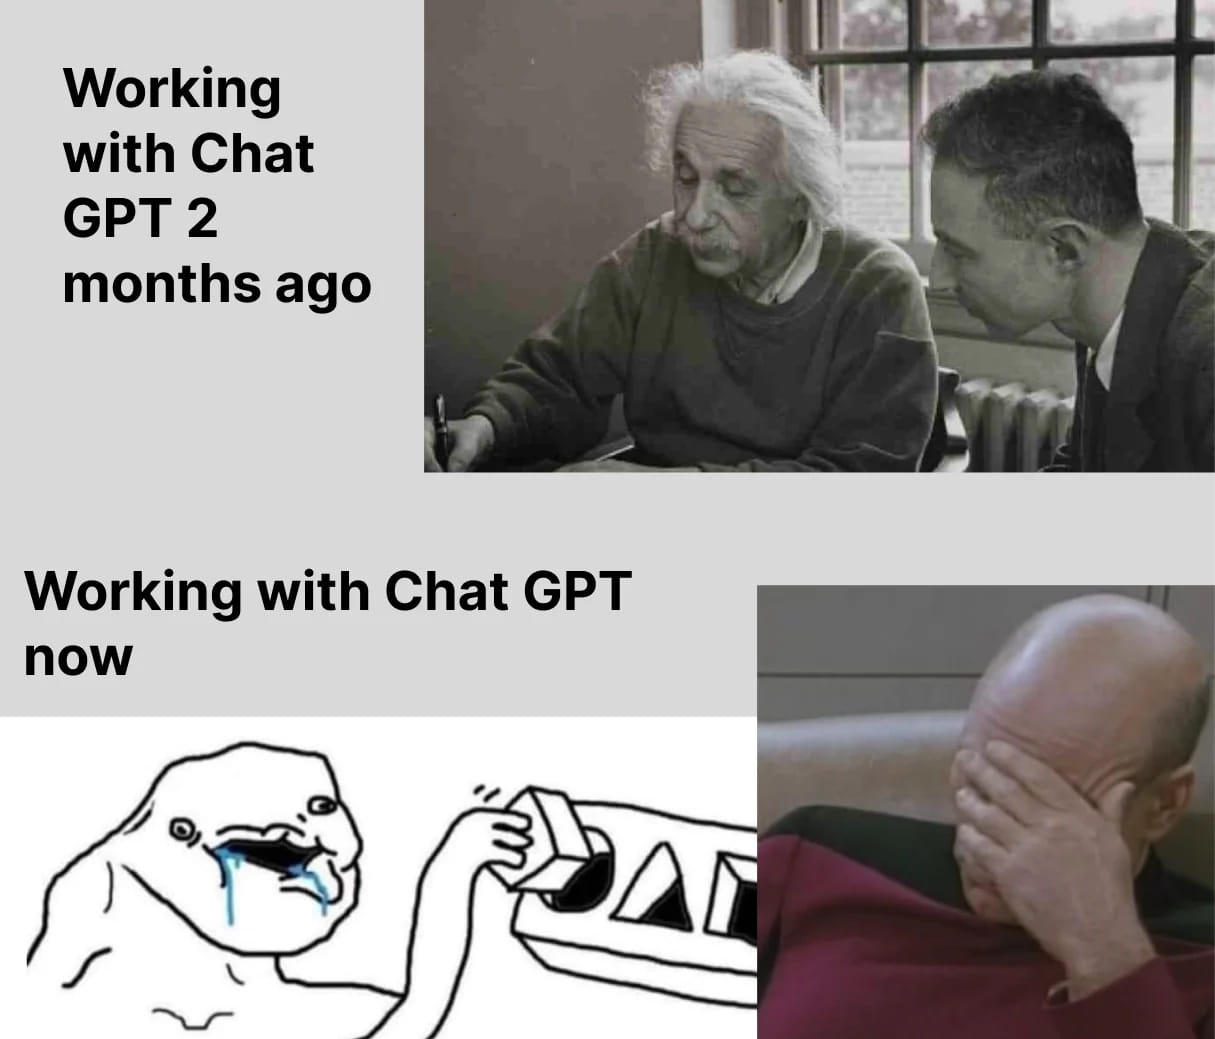 Working with chat GPT now